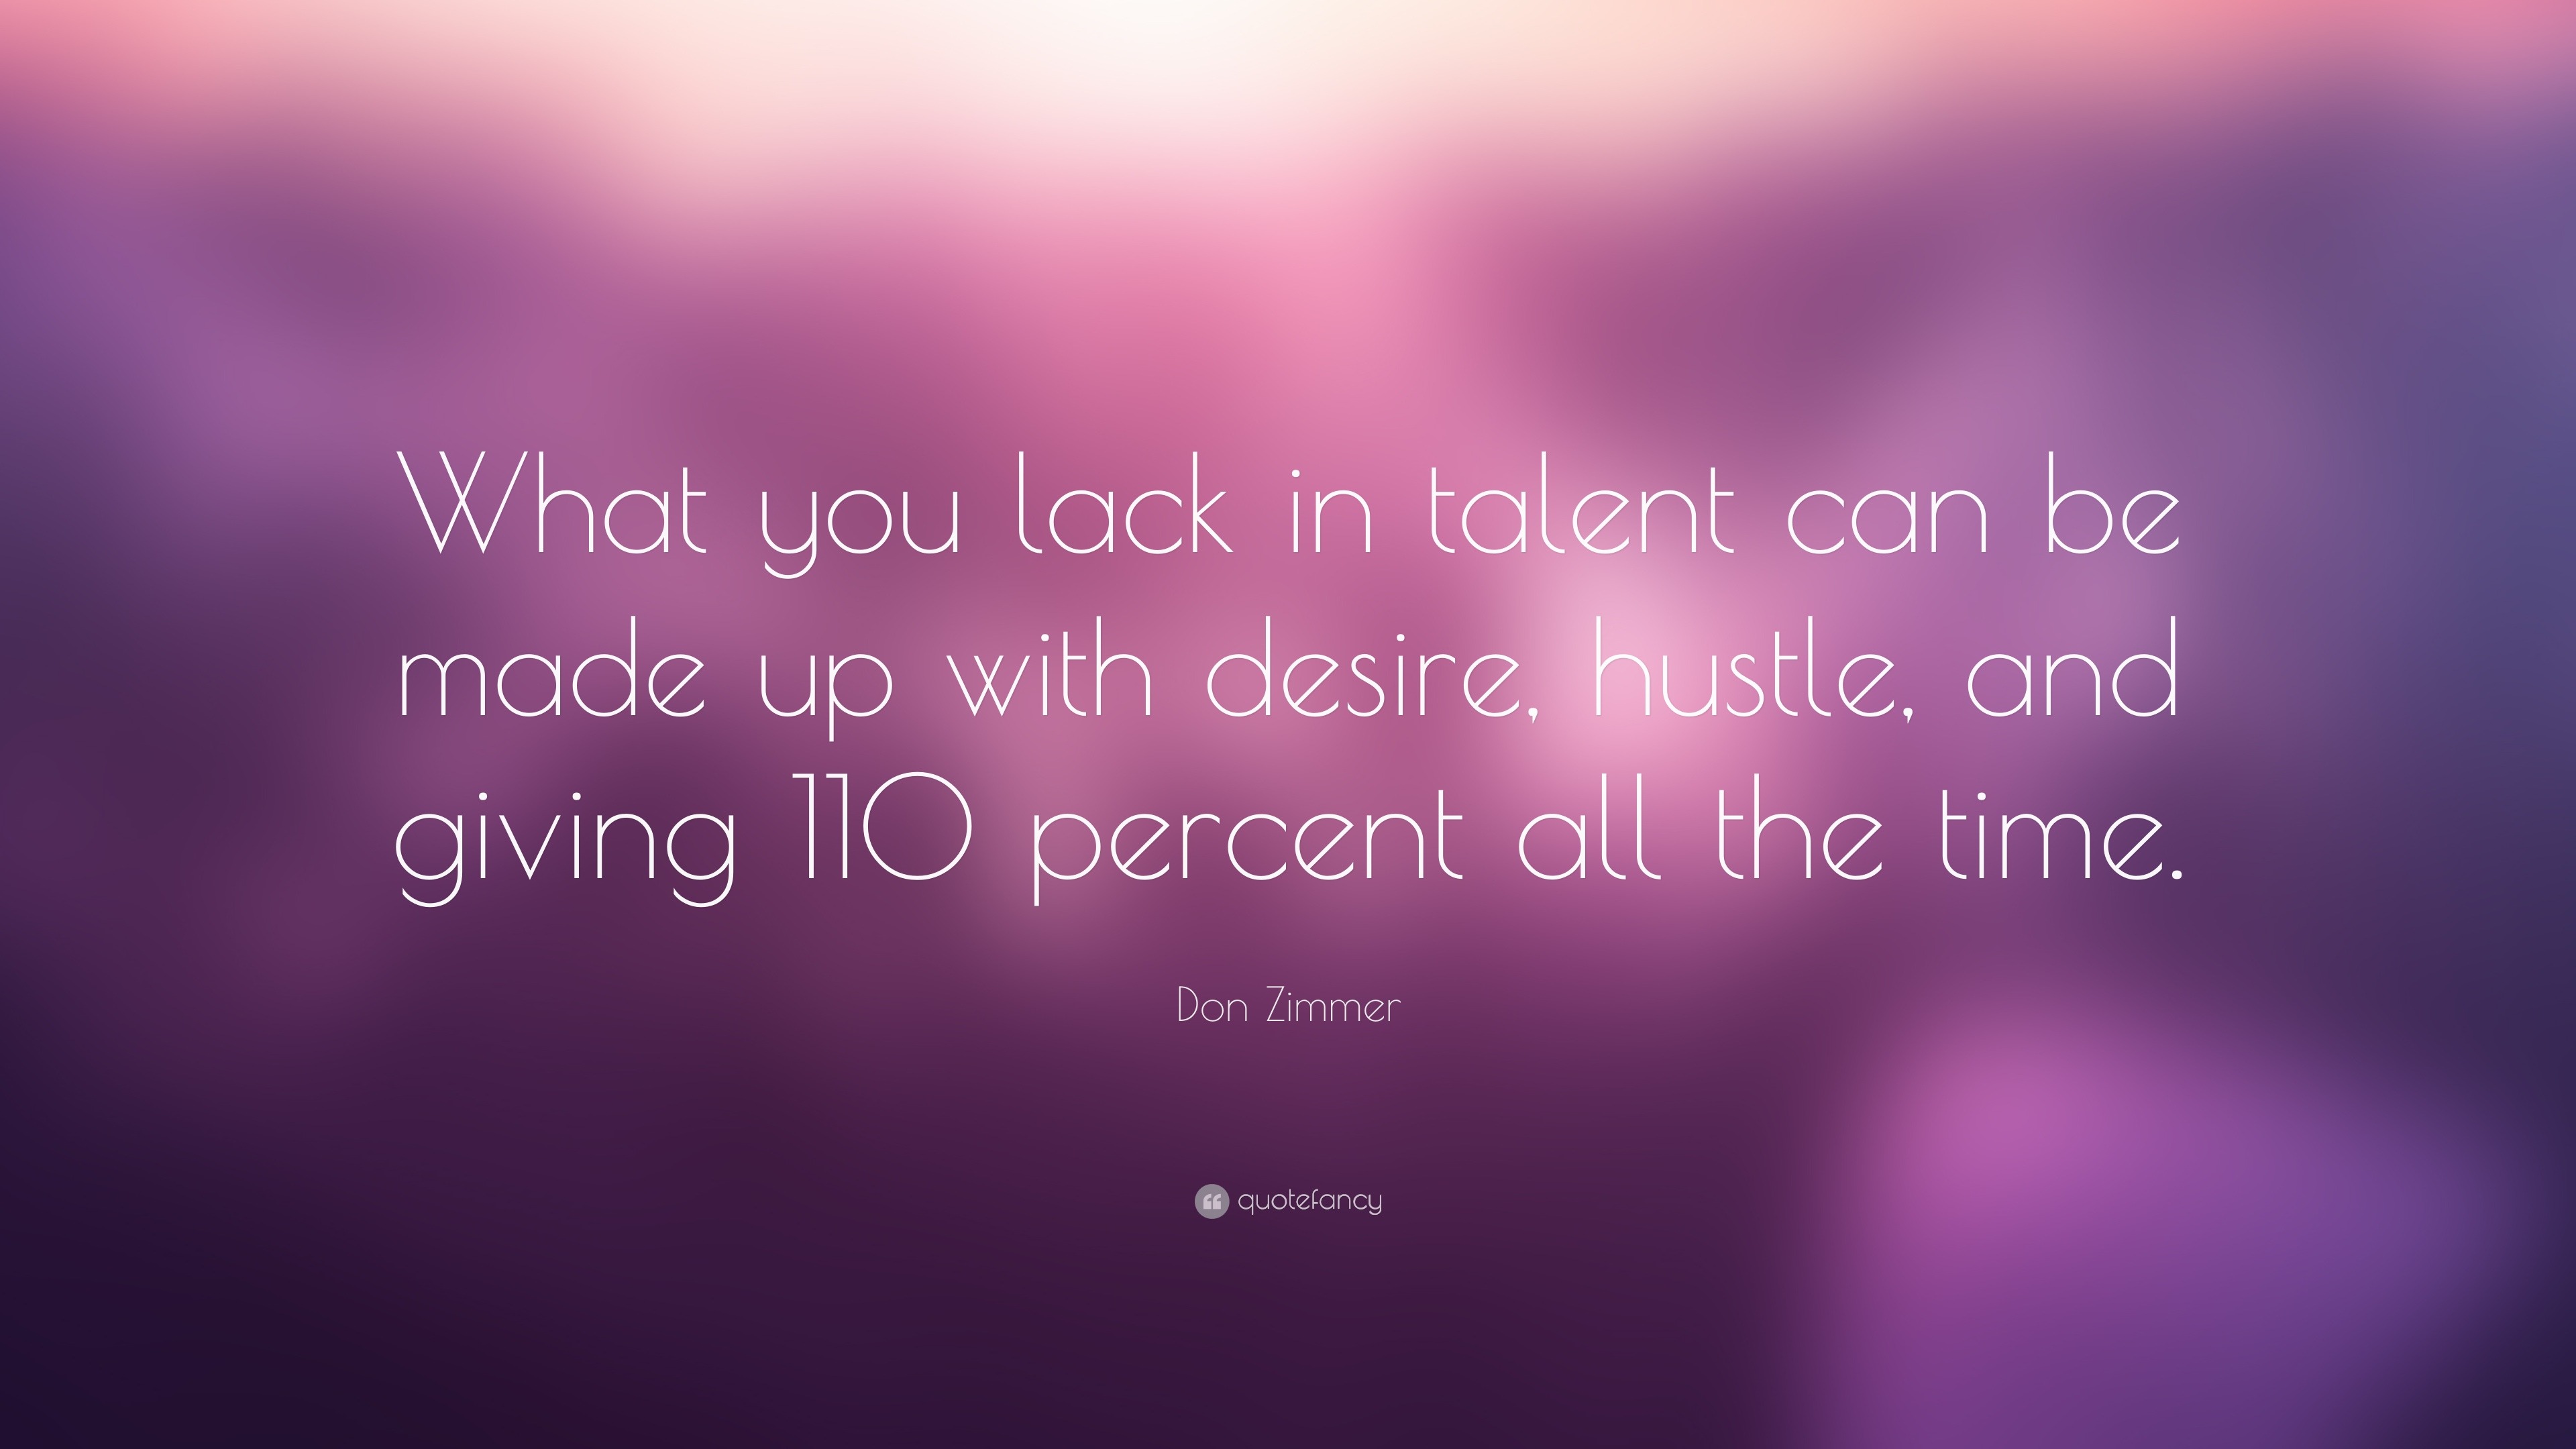 Edulink International Campus - What you lack in talent can be made up with  desire, hustle and giving 110 percent all the time. - Don Zimmer #EDULINK  #successlessons #successquotes #life #success #quotes #donzimmer